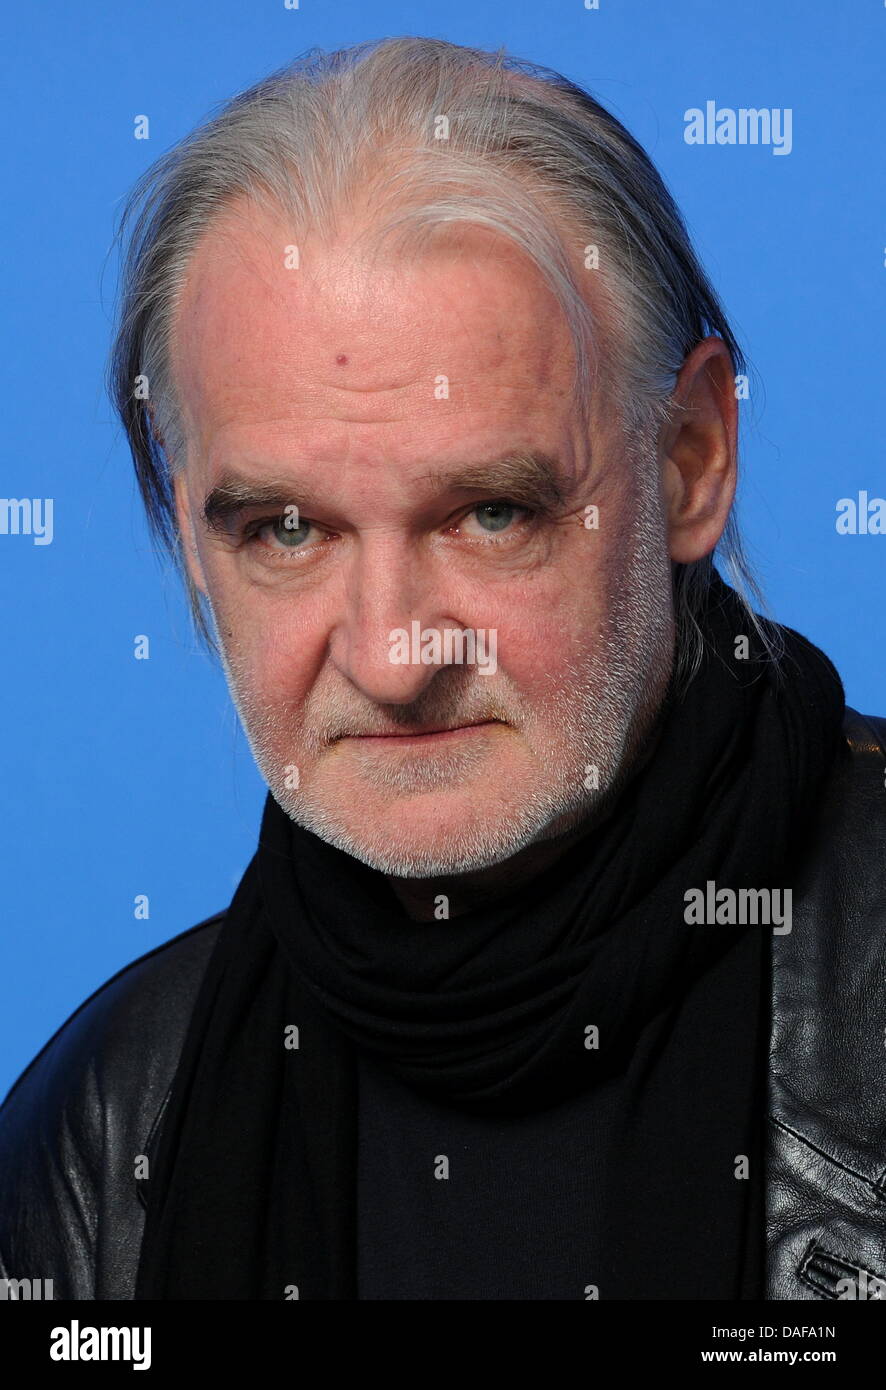 Hungarian director Bela Tarr poses during the photocall for the film 'The Turin Horse' ('A Torinoi Lo') during the 61st Berlin International Film Festival in Berlin, Germany, 15 February 2011. The film is shown in the competition program section of the International Film Festival. The 61st Berlinale takes place from 10 to 20 February 2011. Photo: Tim Brakemeier Stock Photo